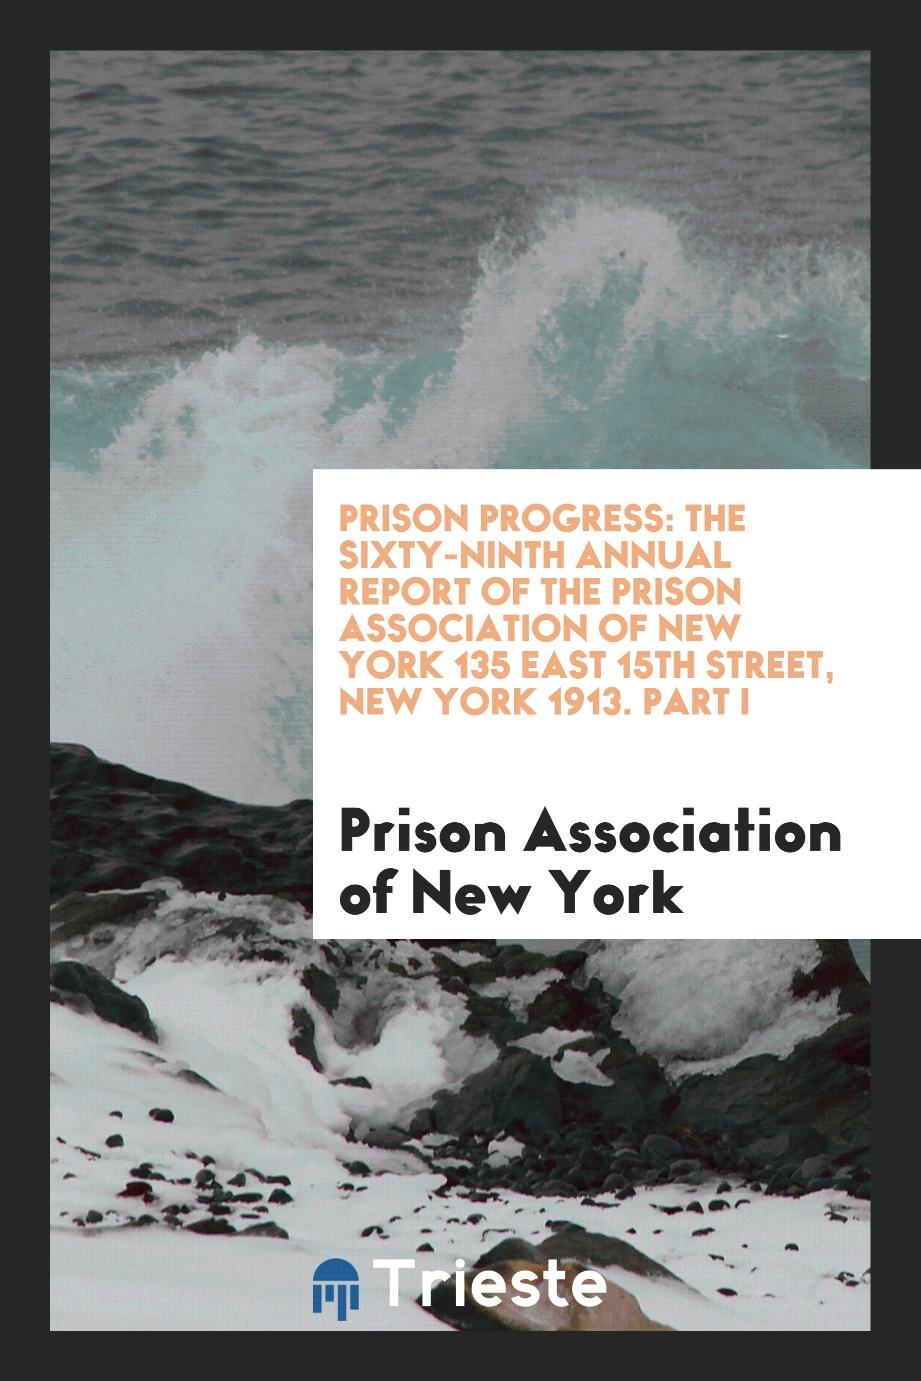 Prison Progress: The Sixty-Ninth Annual Report of the Prison Association of New York 135 East 15th Street, New York 1913. Part I